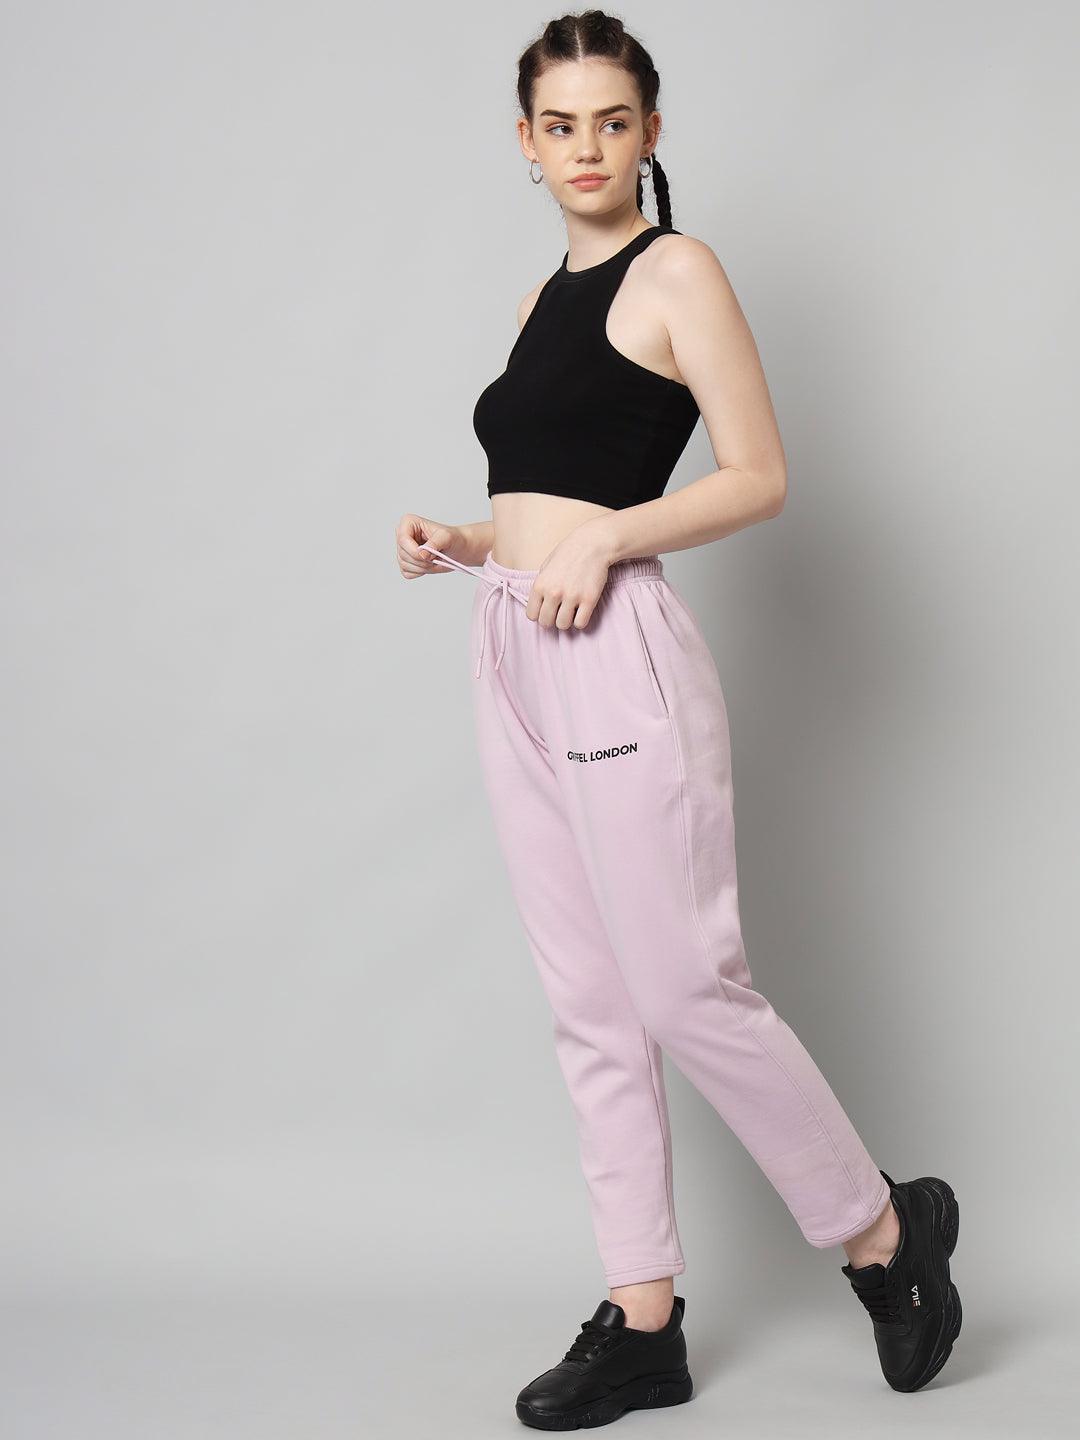 Copy of Griffel Women’s Front Logo Basic Solid Light Purple Trackpant - griffel